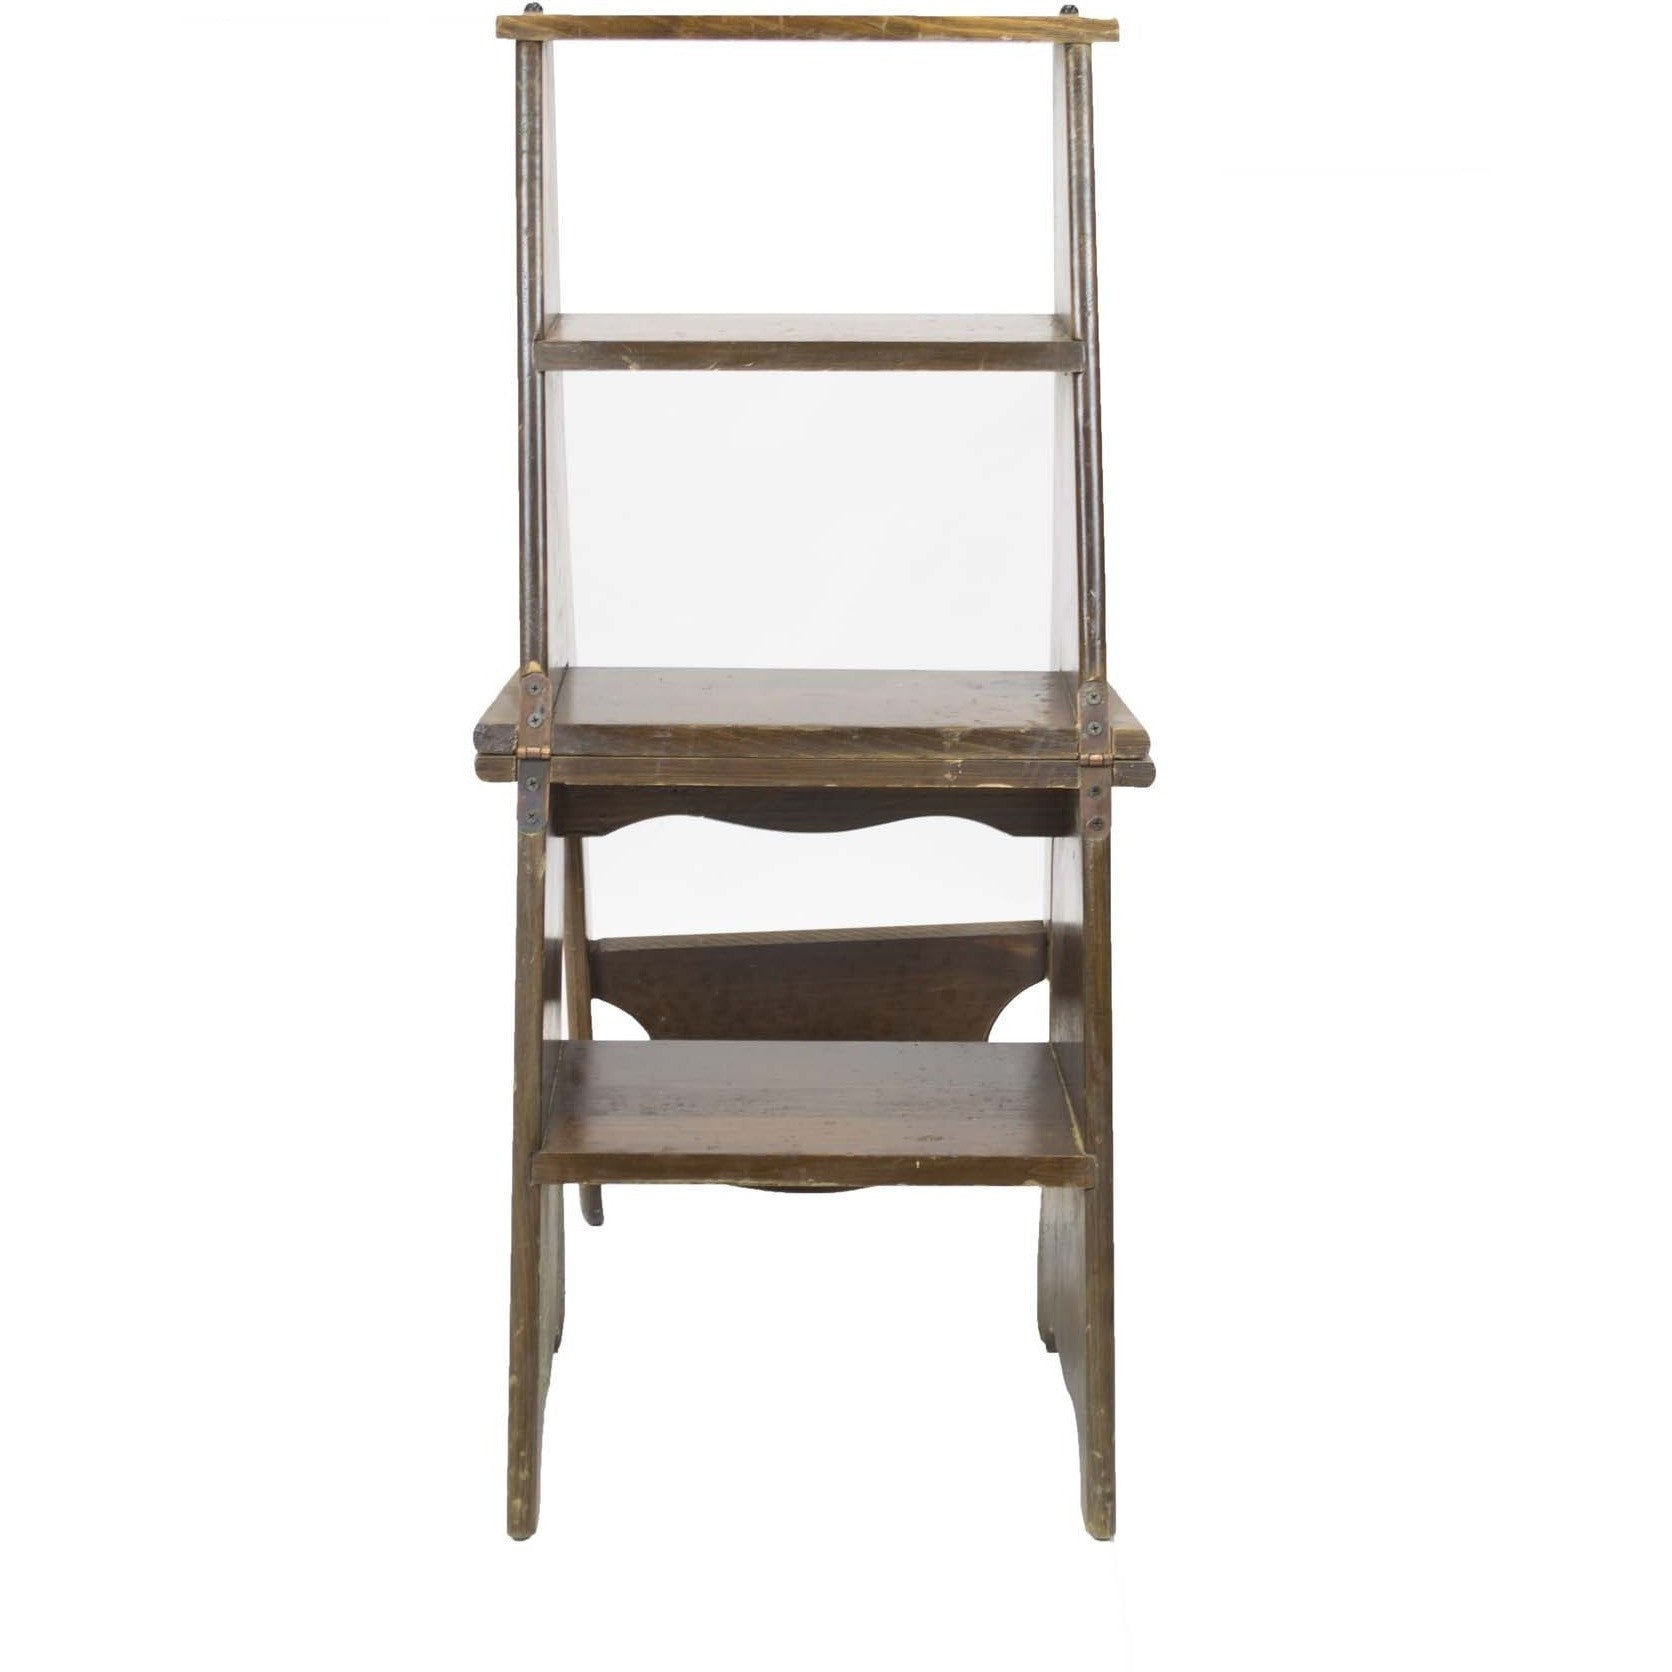 Convertible Ladder-Chair Library Step Stool